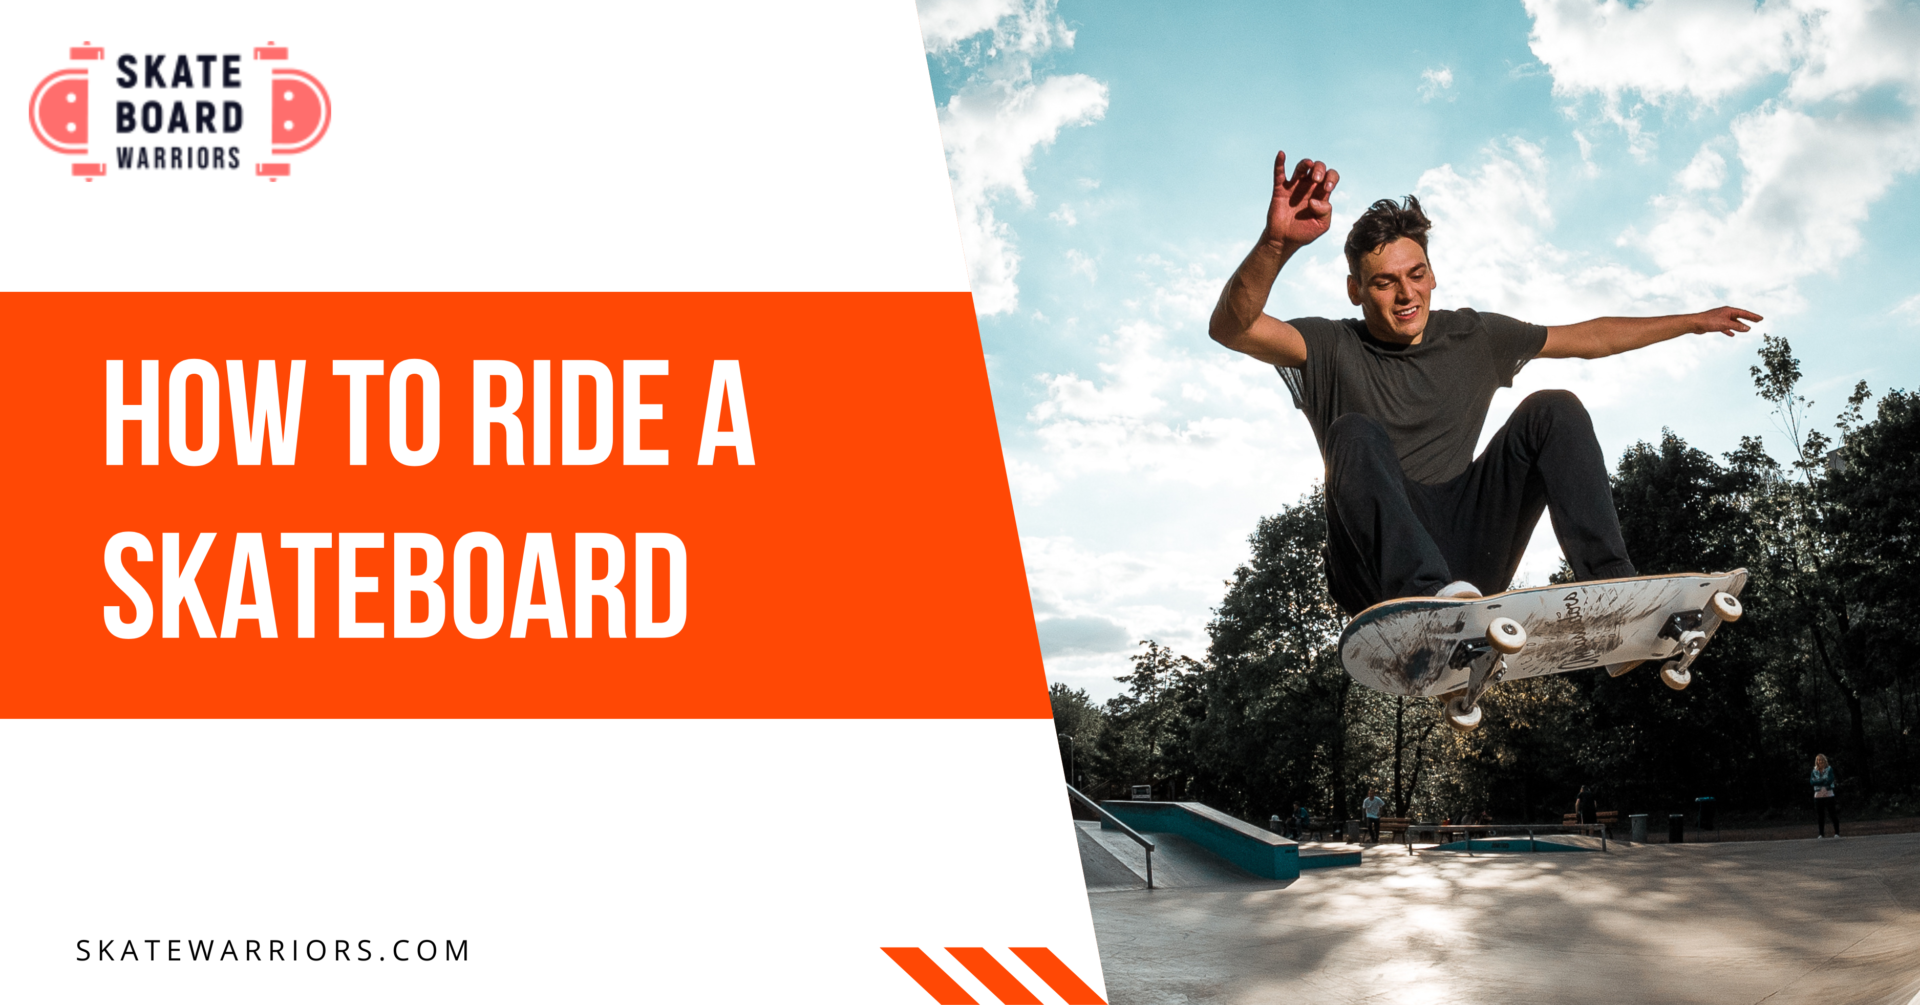 How To Ride a Skateboard?